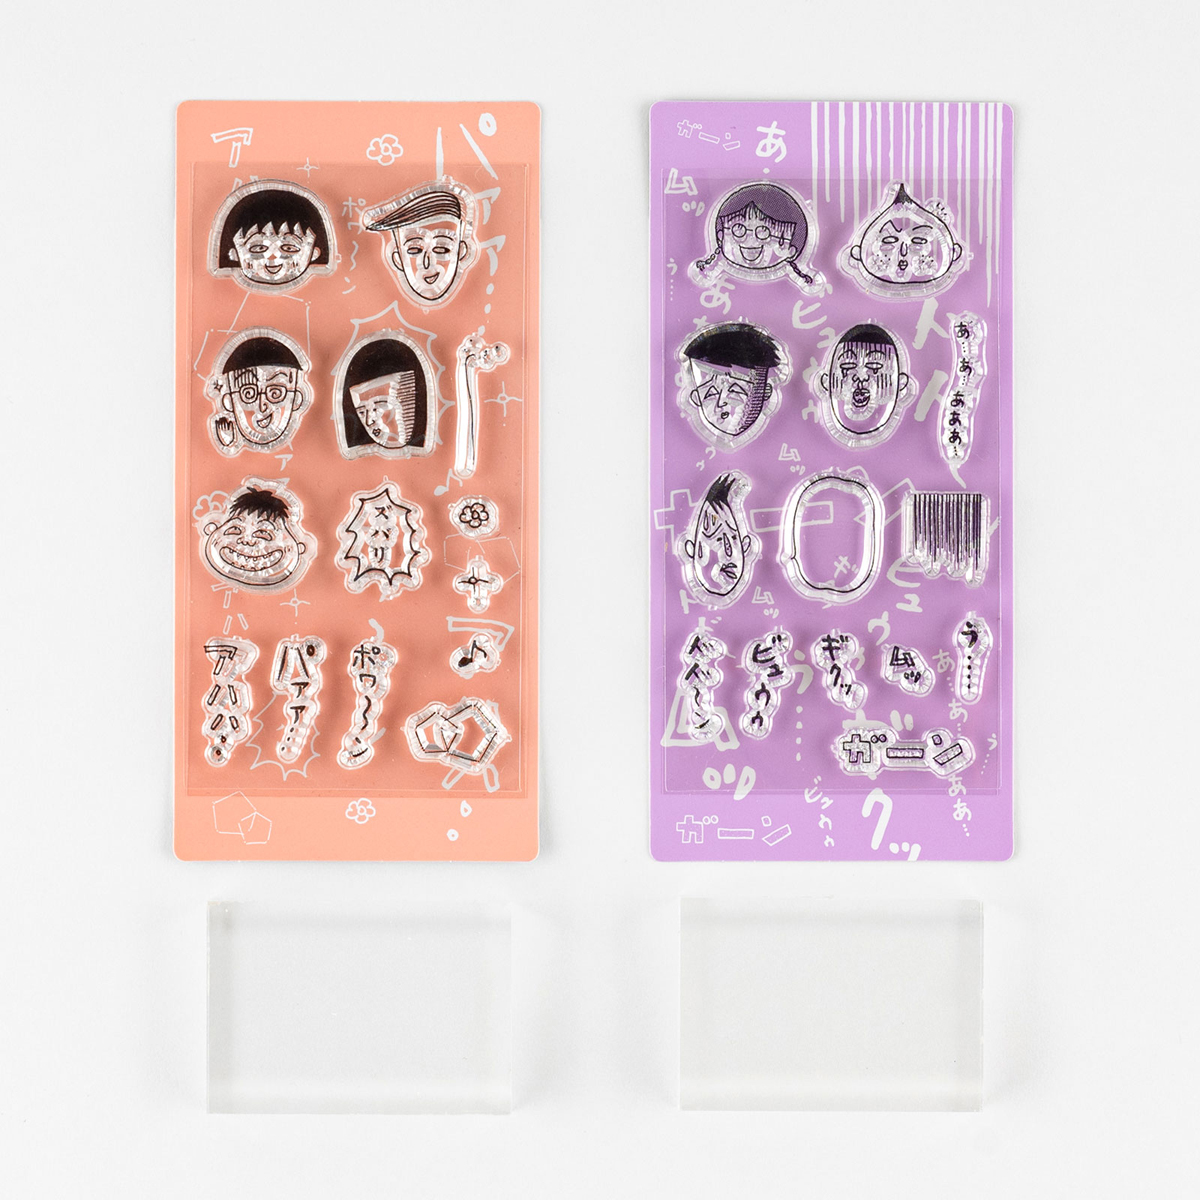 Hobonichi / Chibi Maruko-chan Clear Stamp (Delighted / Dejected